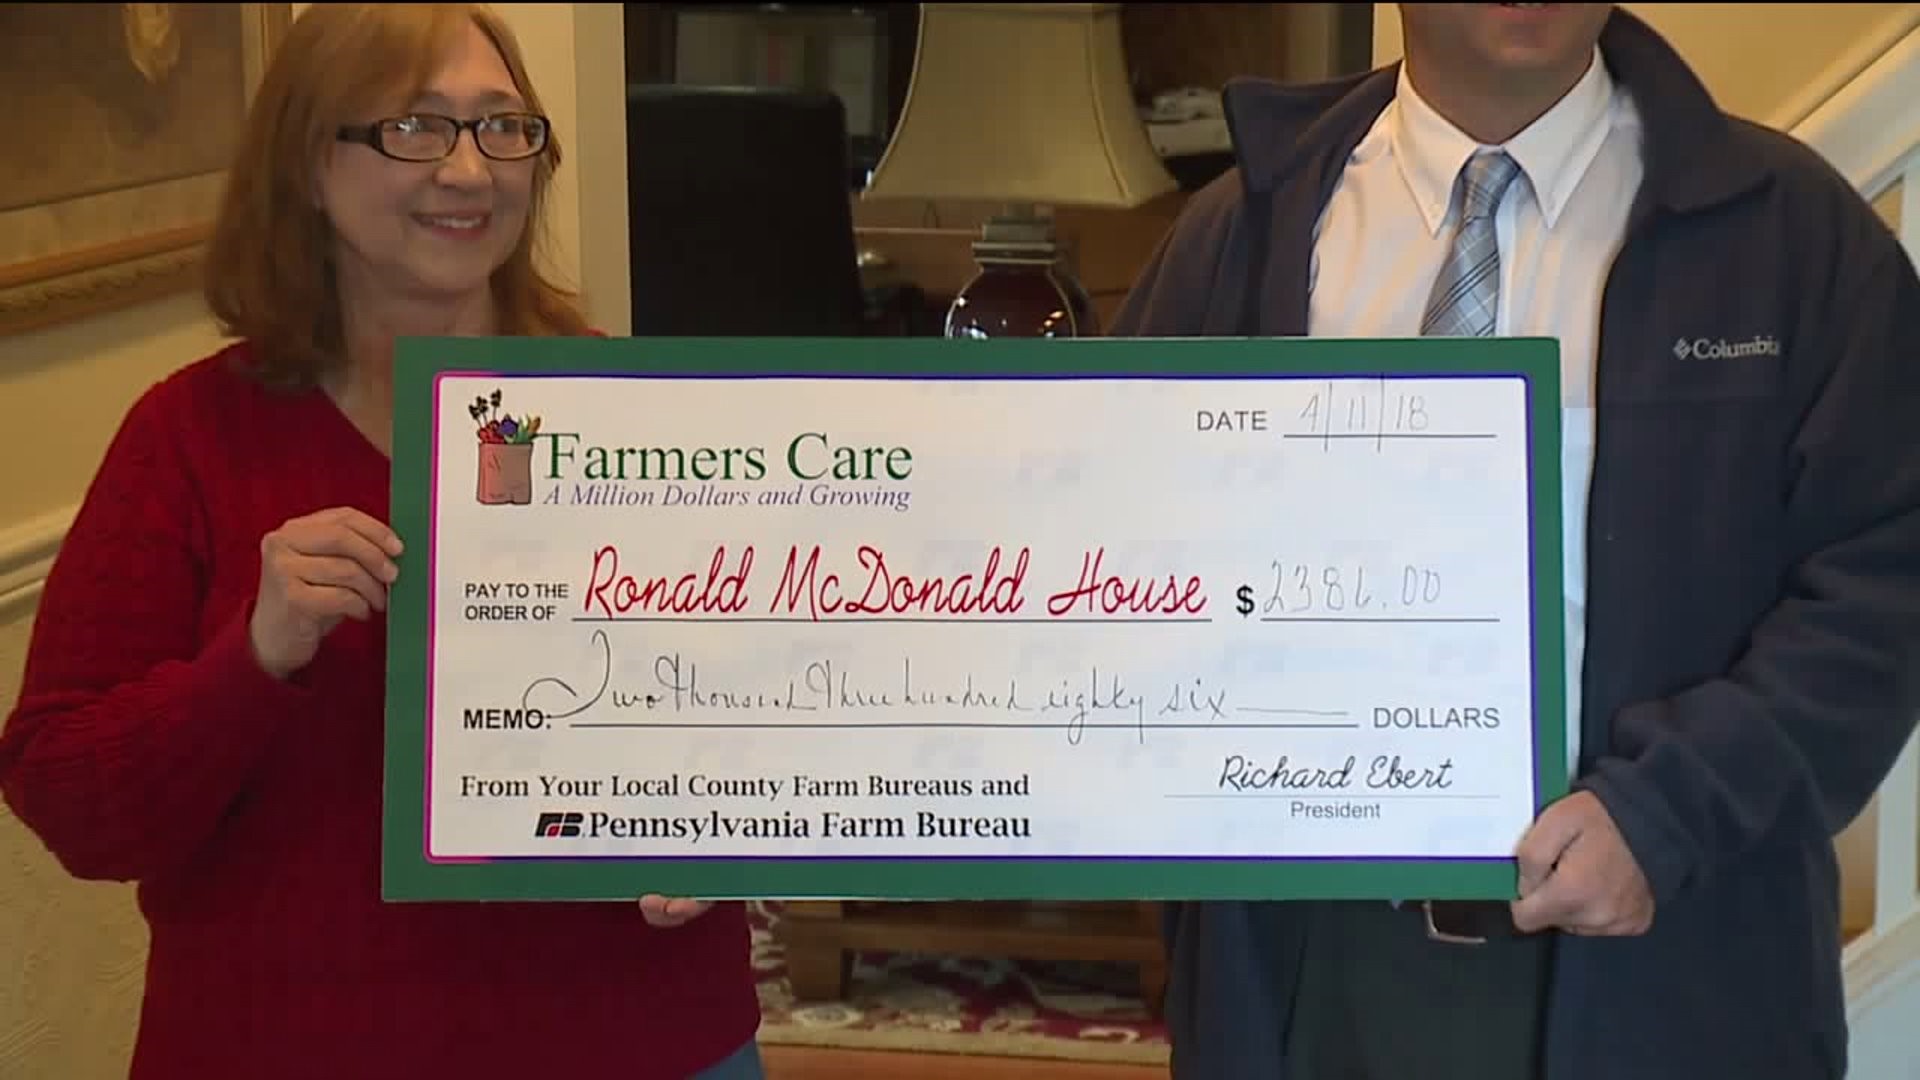 Farmers Deliver to Ronald McDonald House